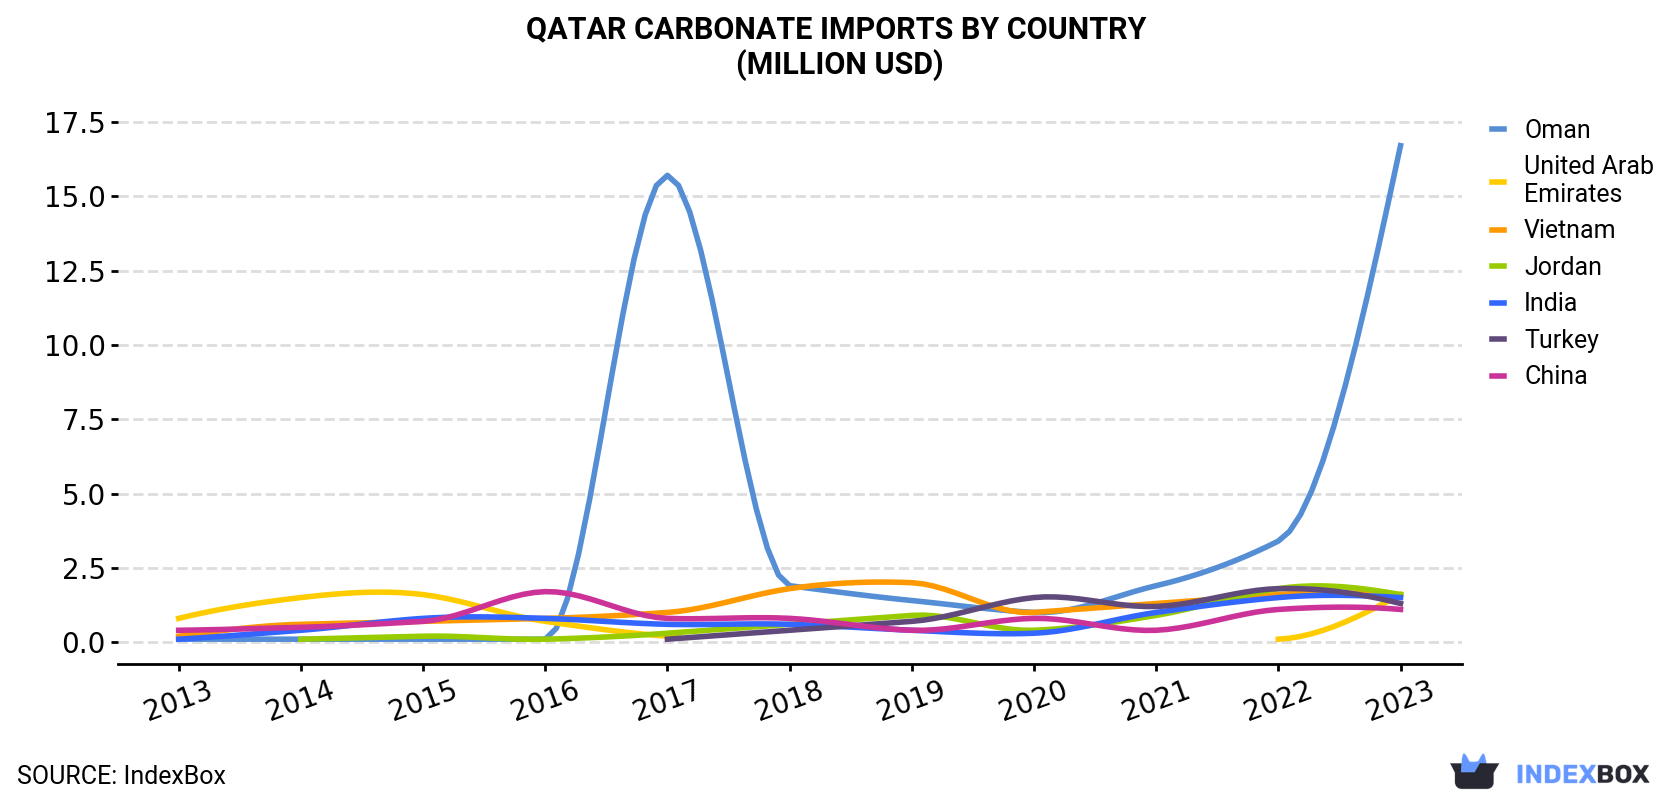 Qatar Carbonate Imports By Country (Million USD)